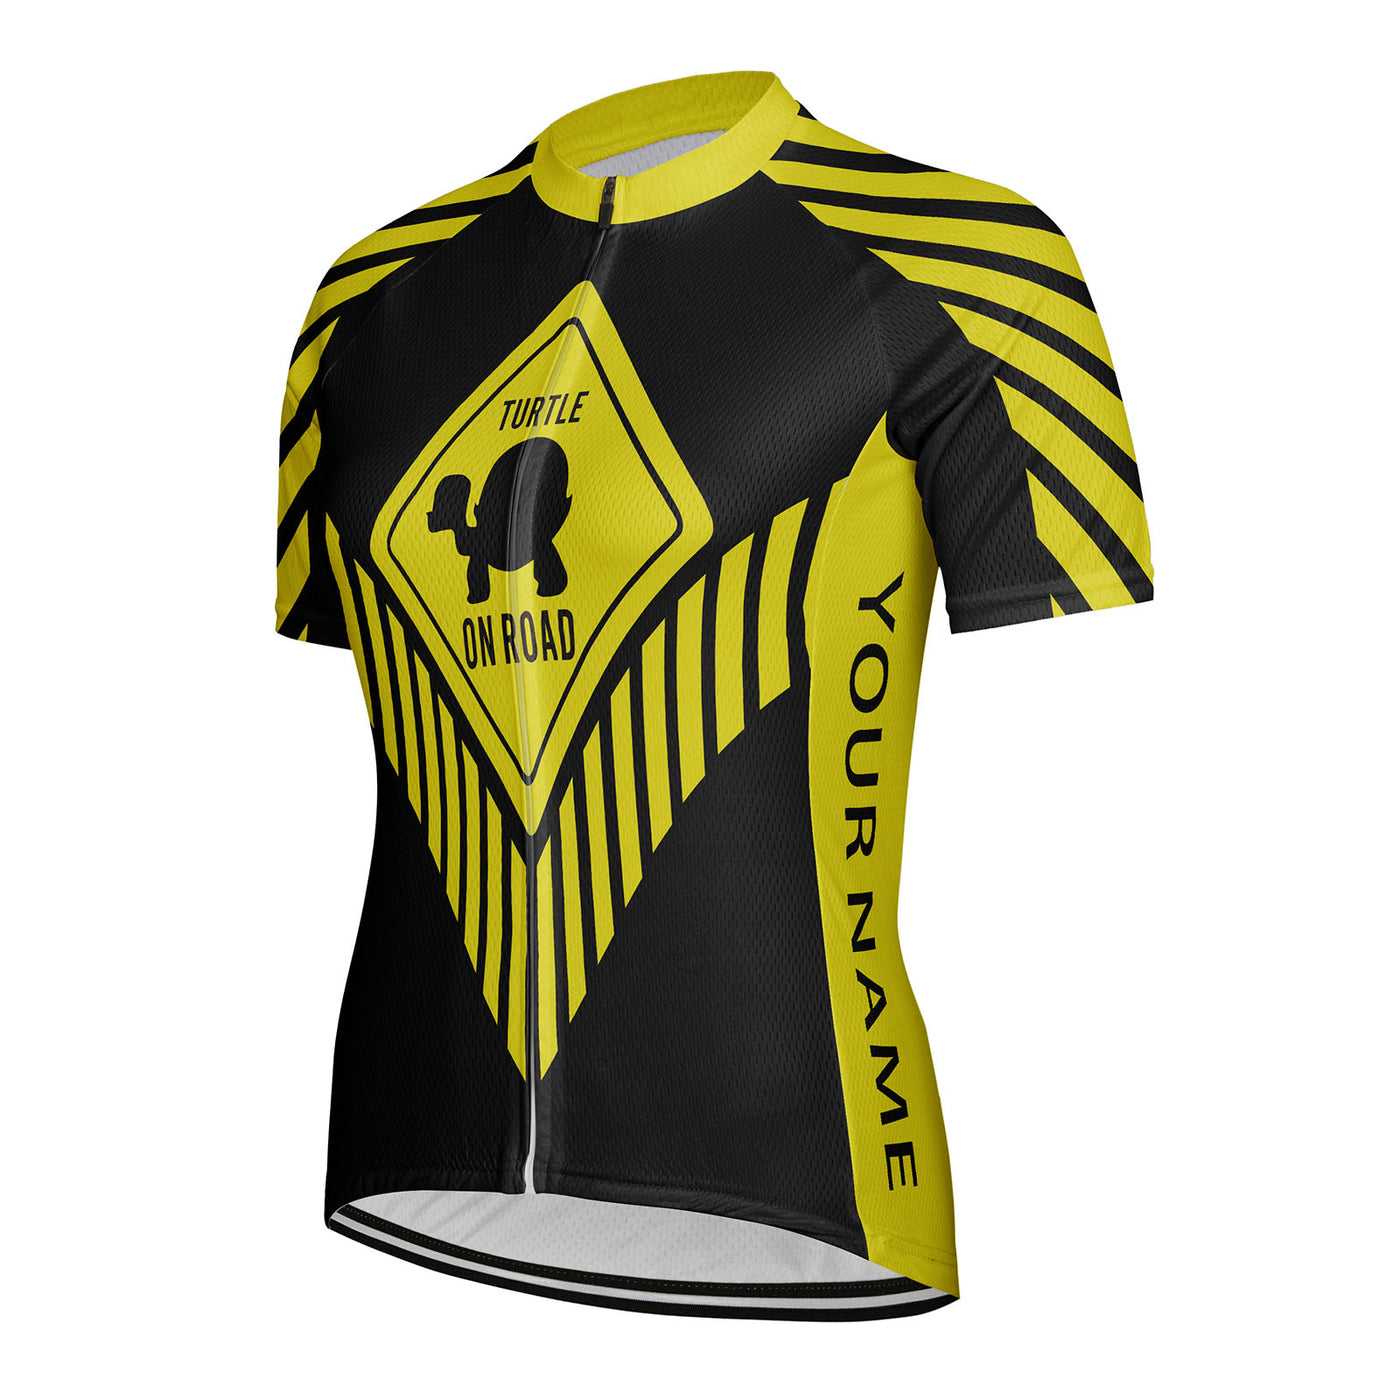 Customized Turtle On Road Women's Cycling Jersey Short Sleeve